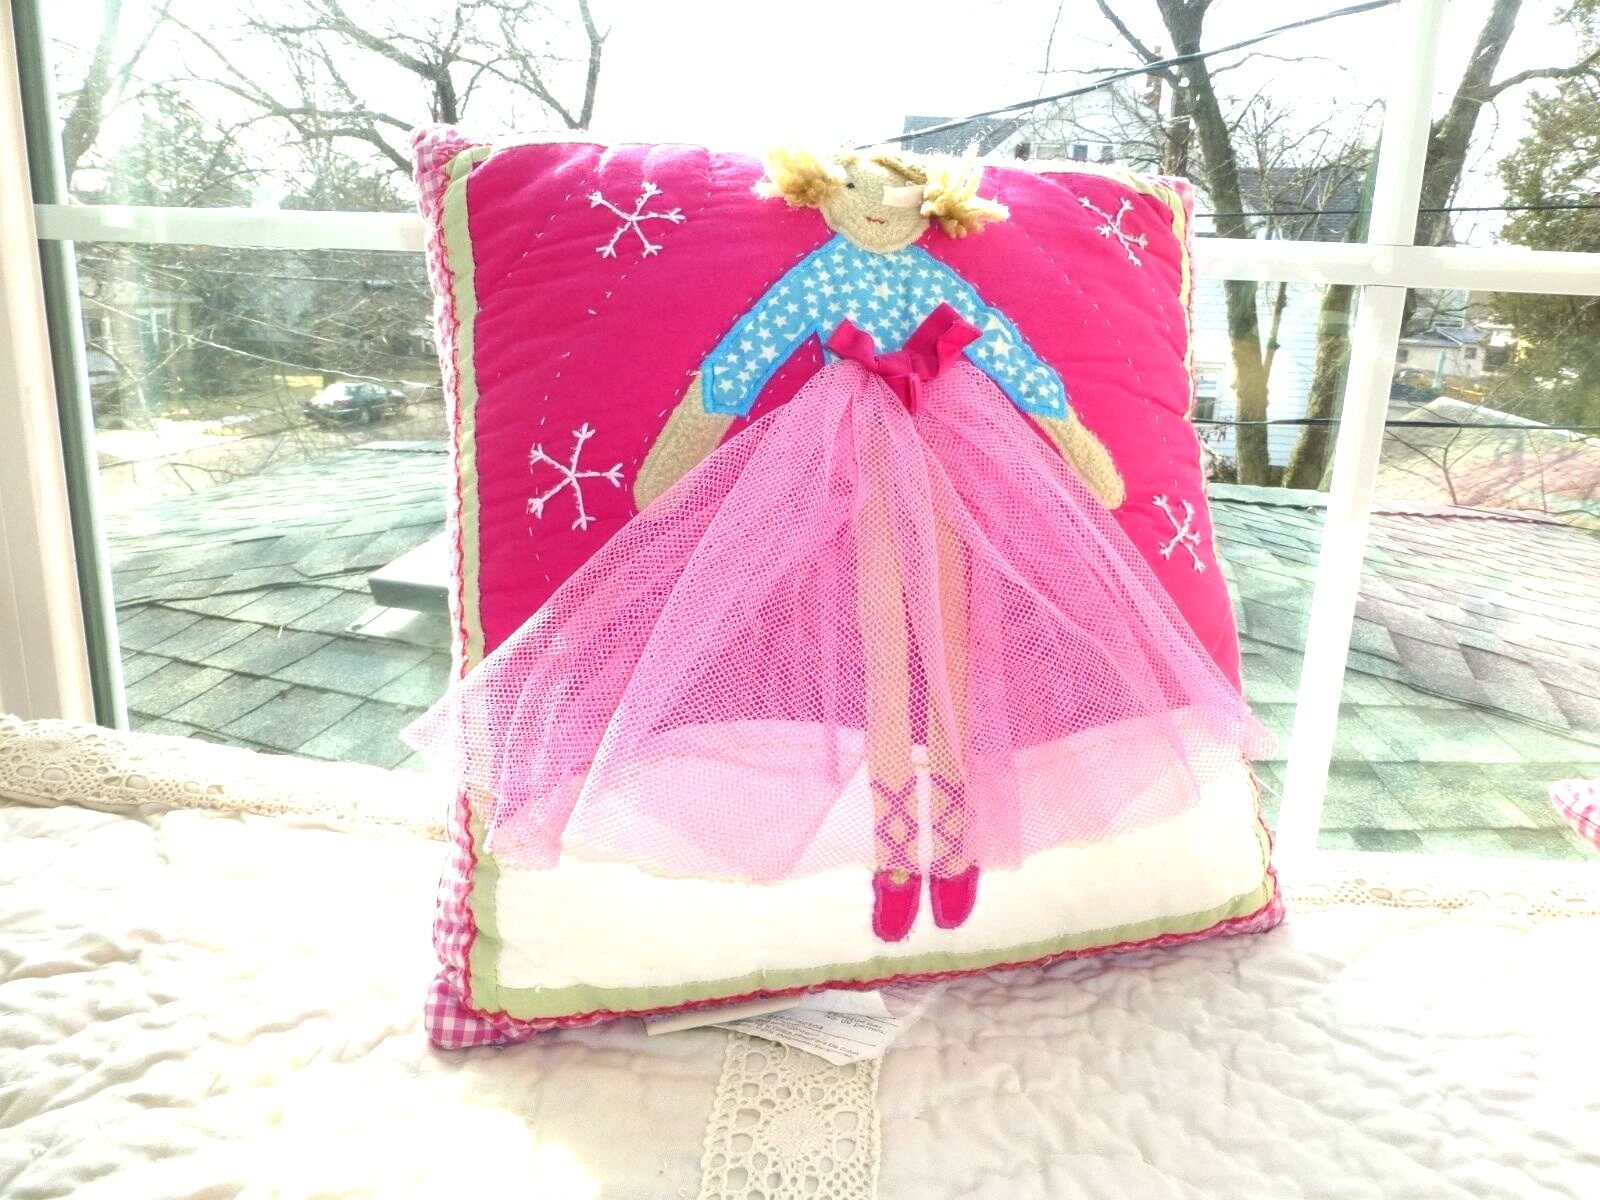 Pottery Barn Kids Embroidered Appliqué Ballerina Pink Doll Decorative Pillow 12"